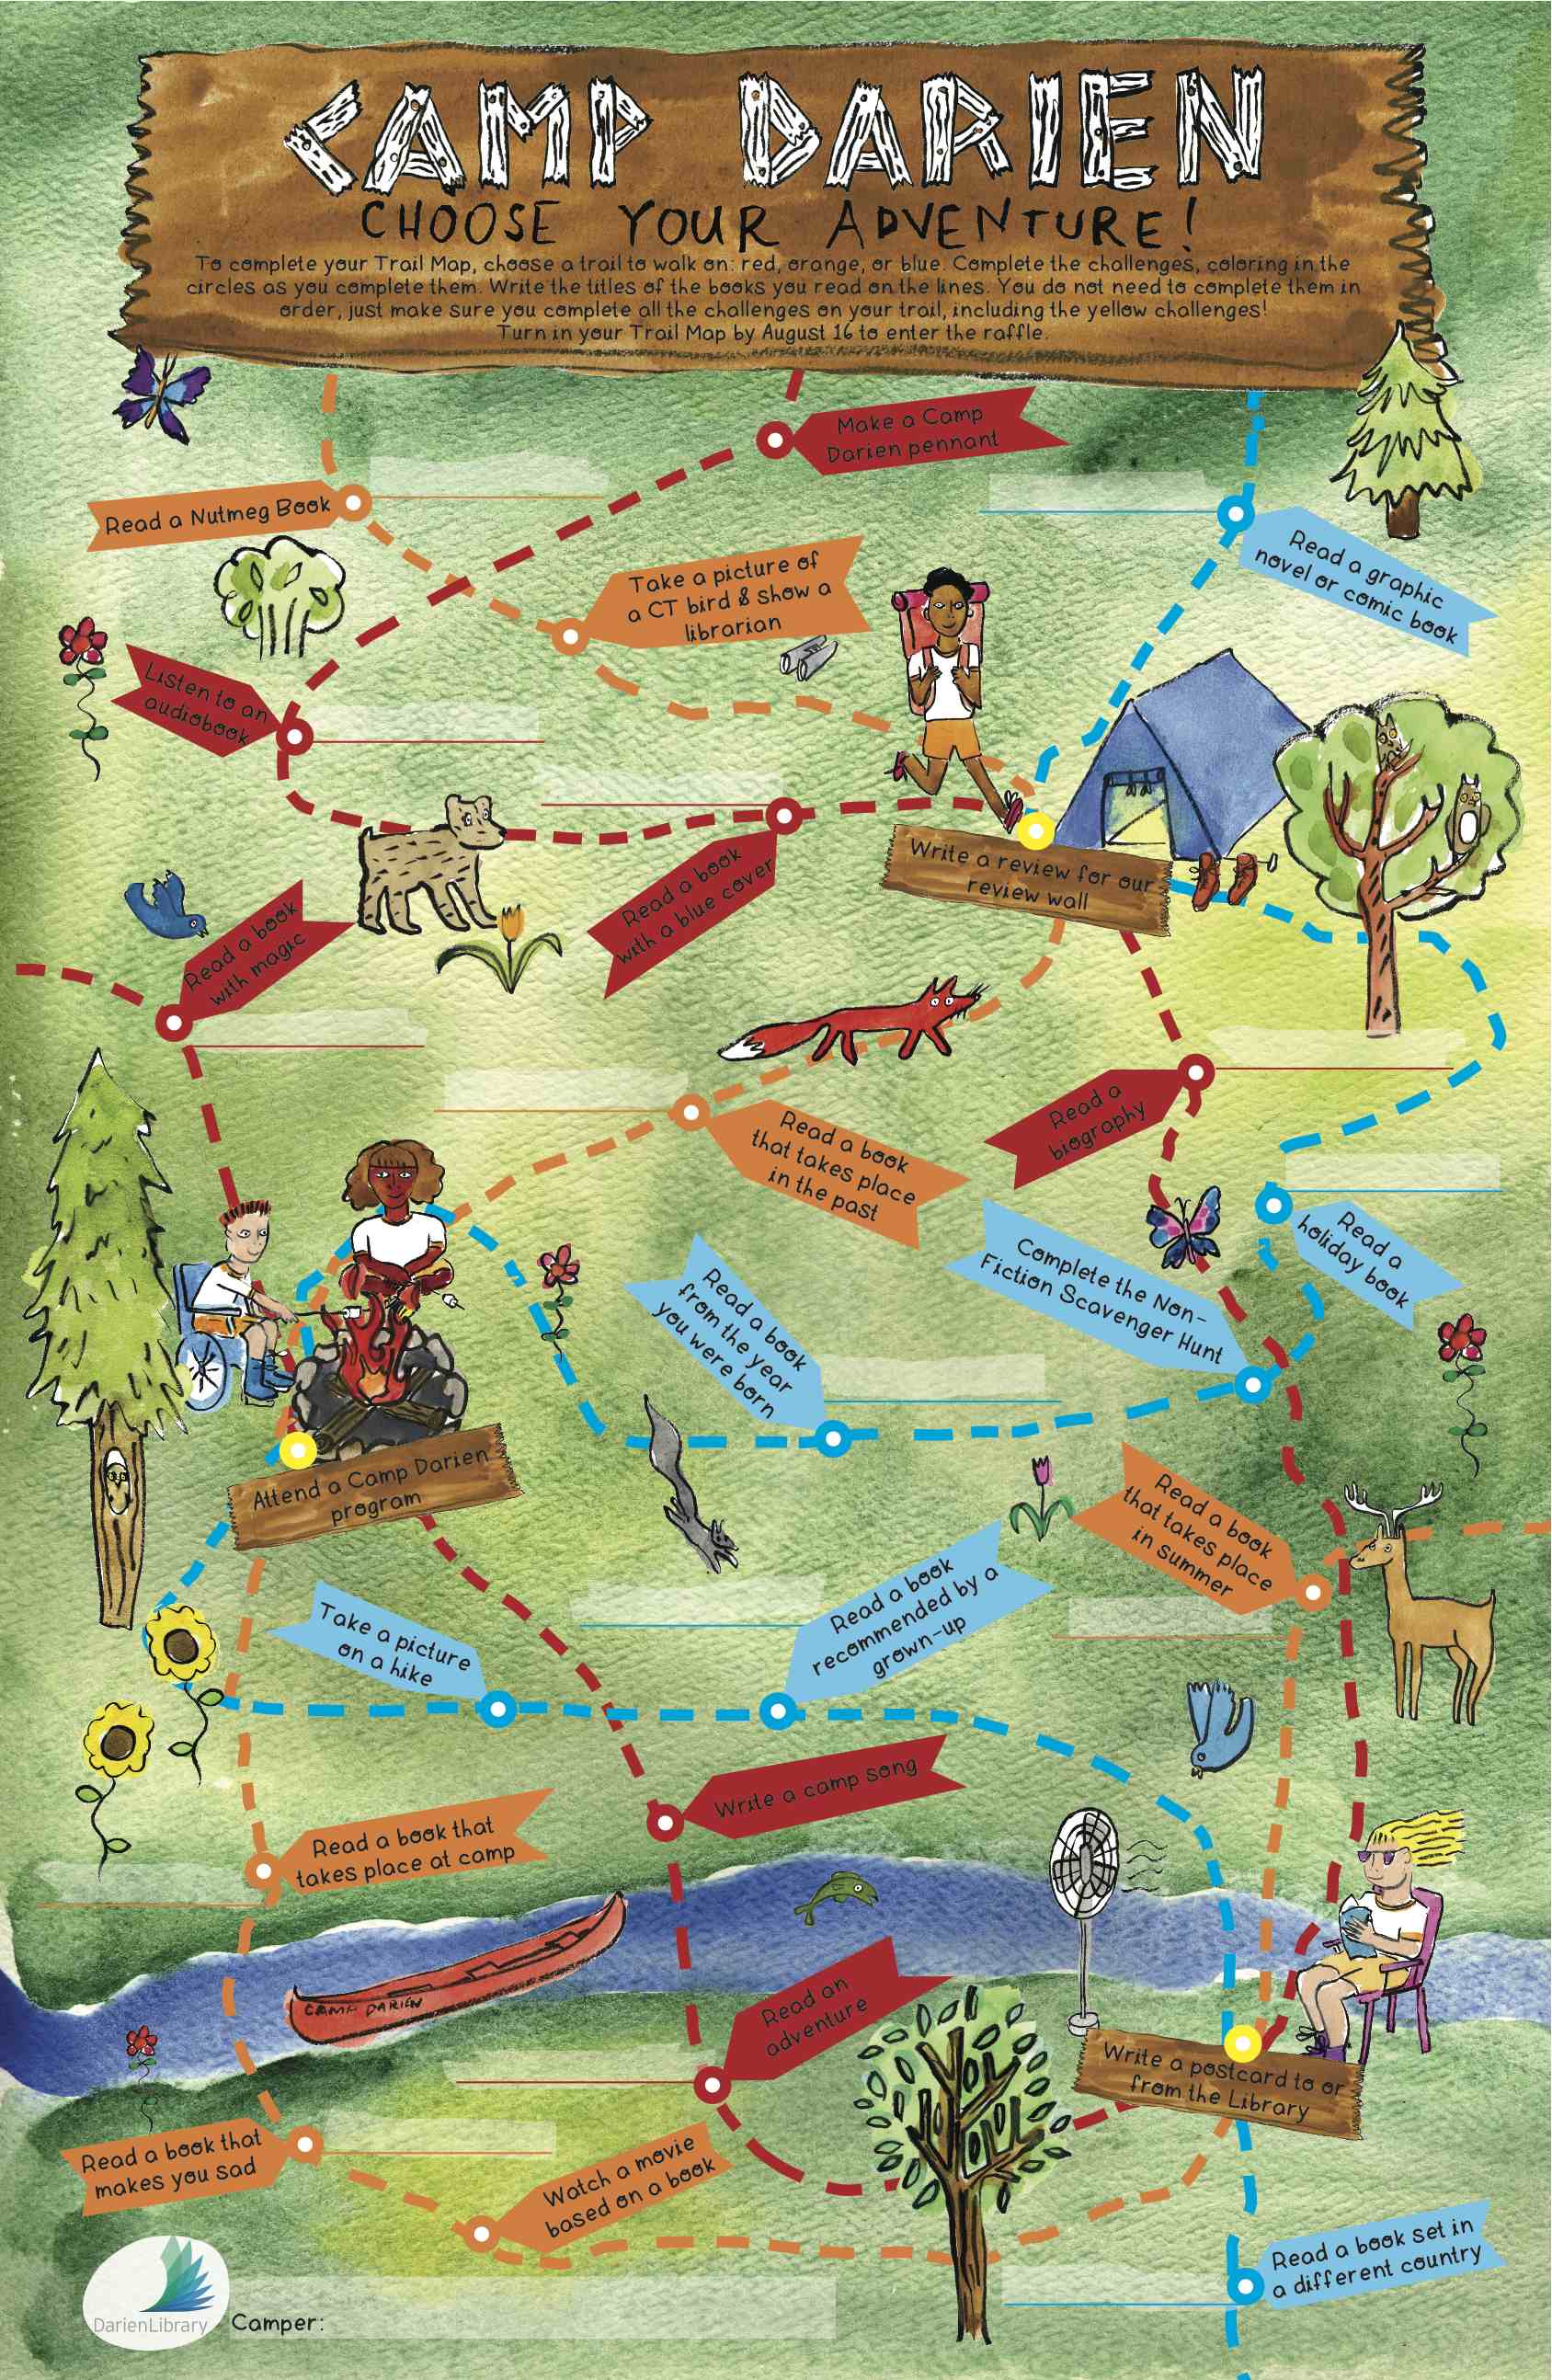 Trail Map for Darien Library's Summer Reading 2017